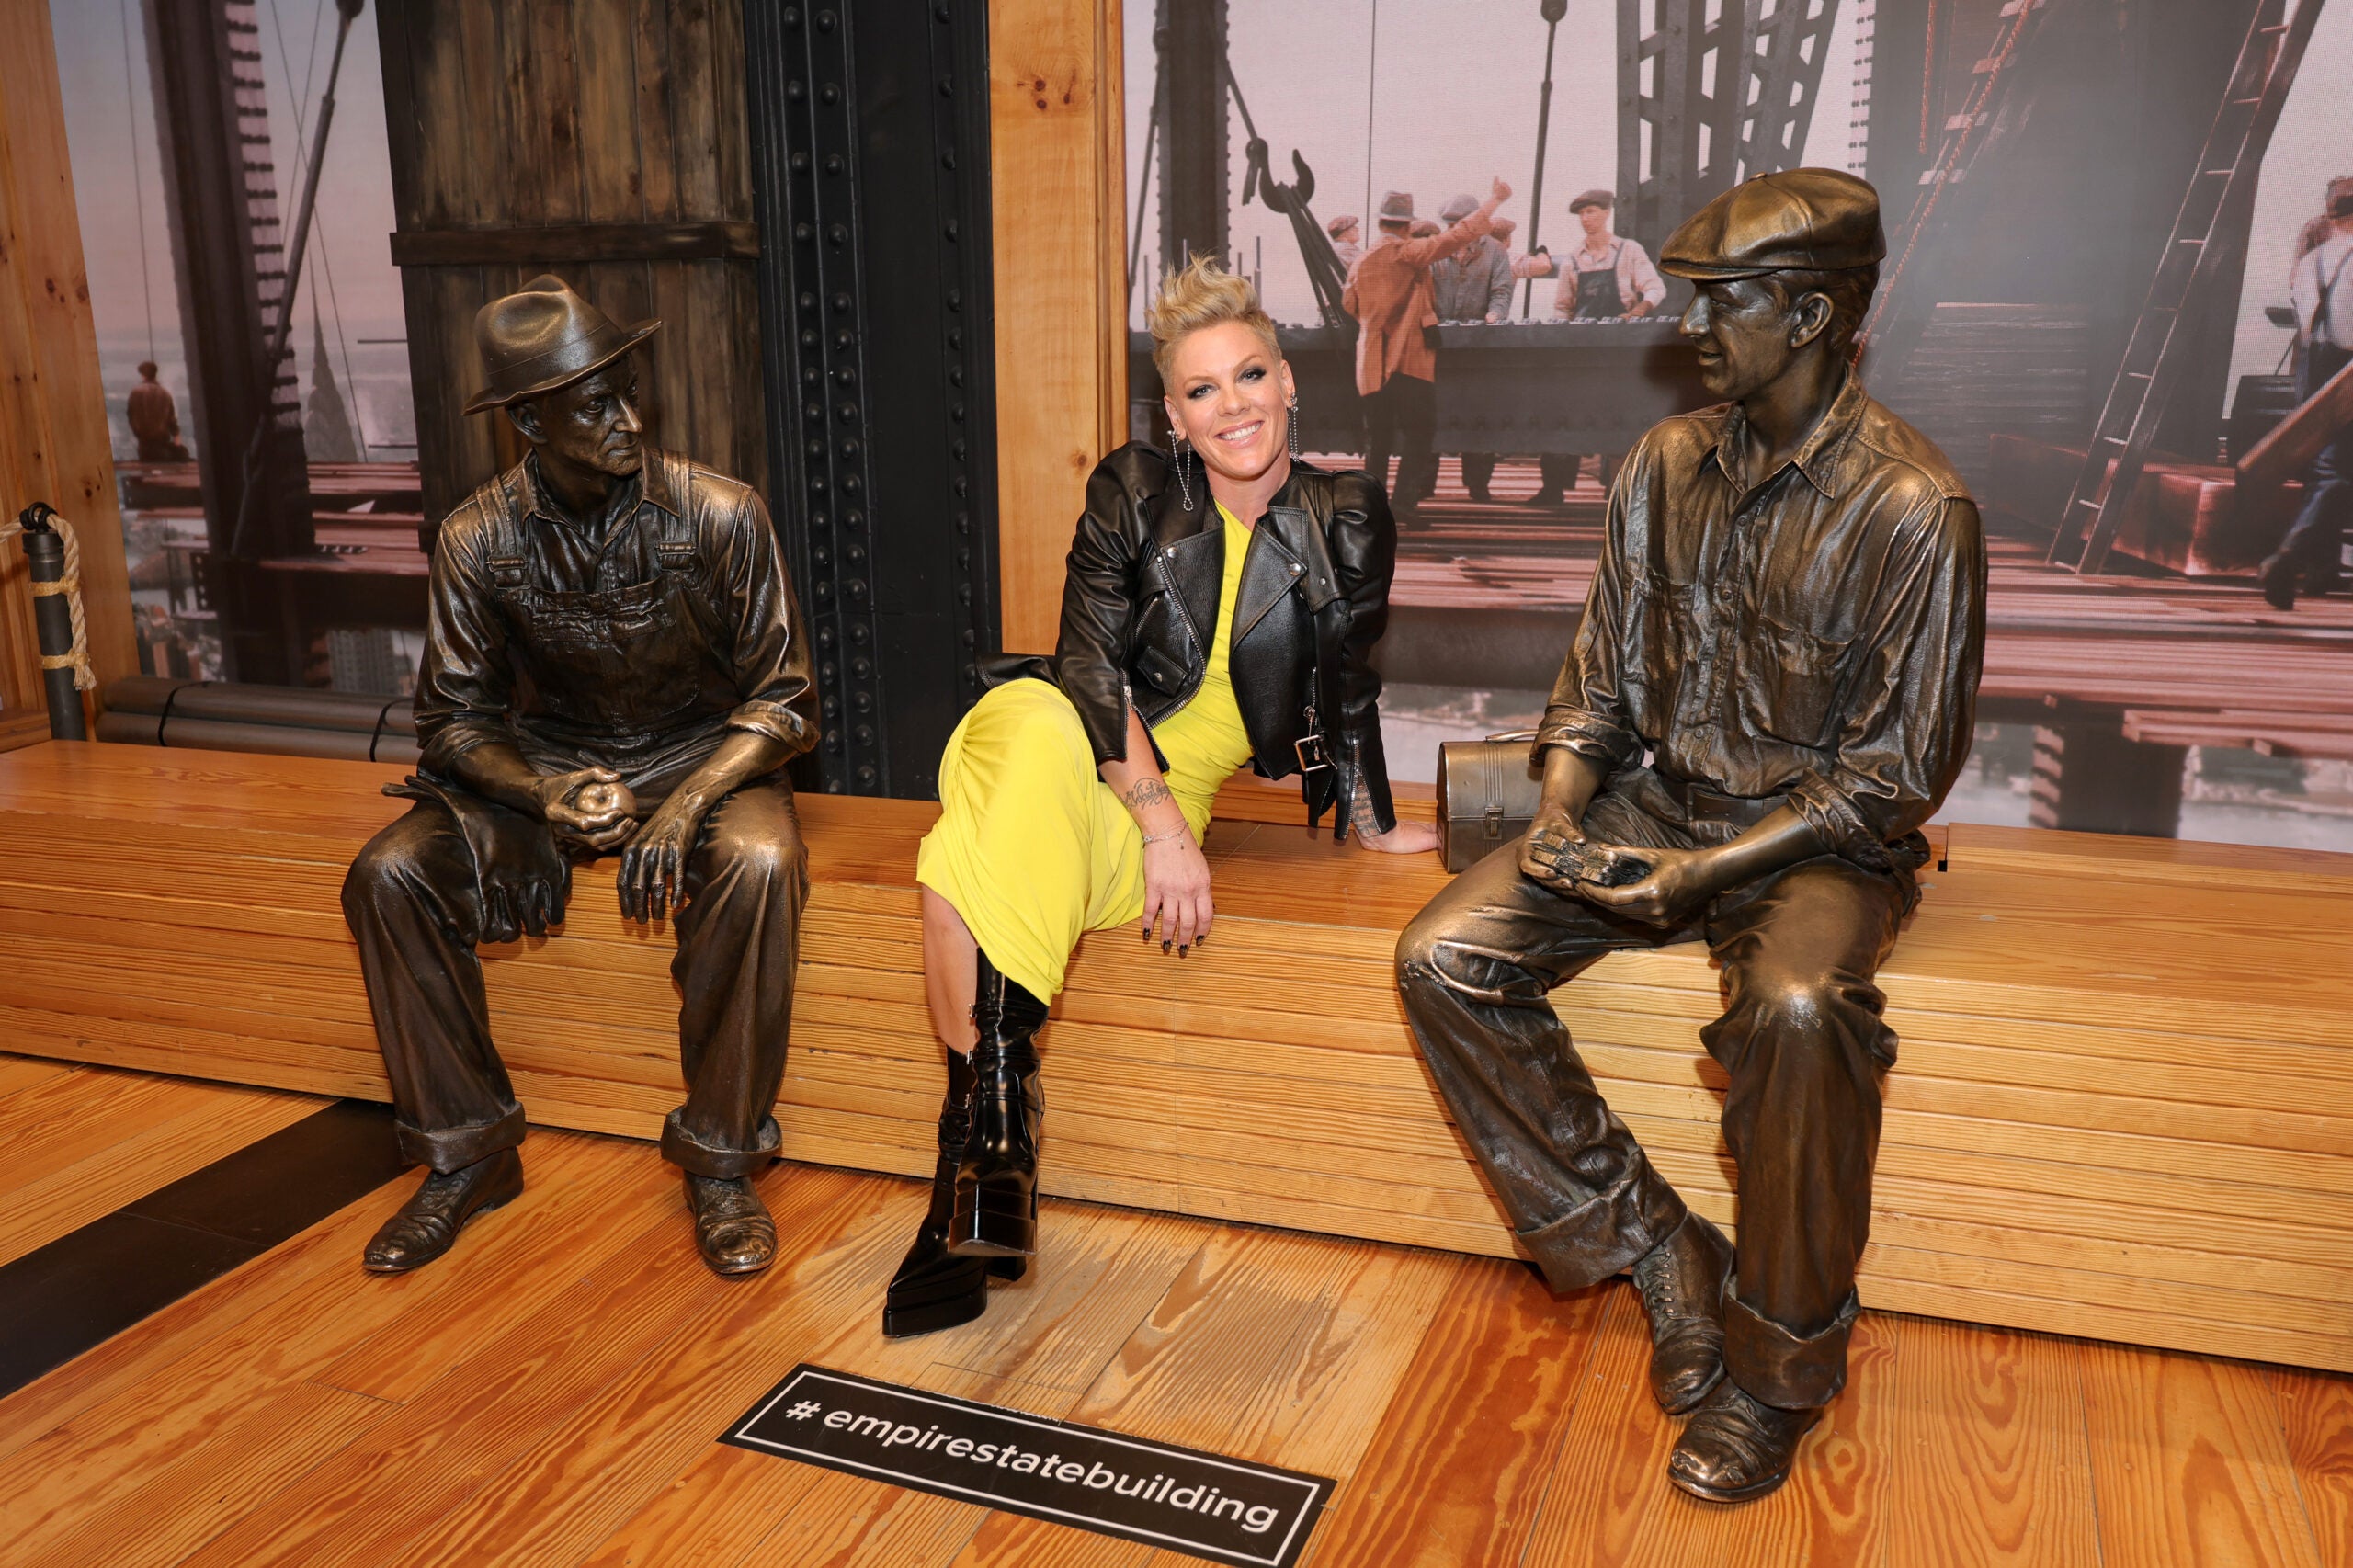 Singer Pink sitting between two bronze statues at ESB